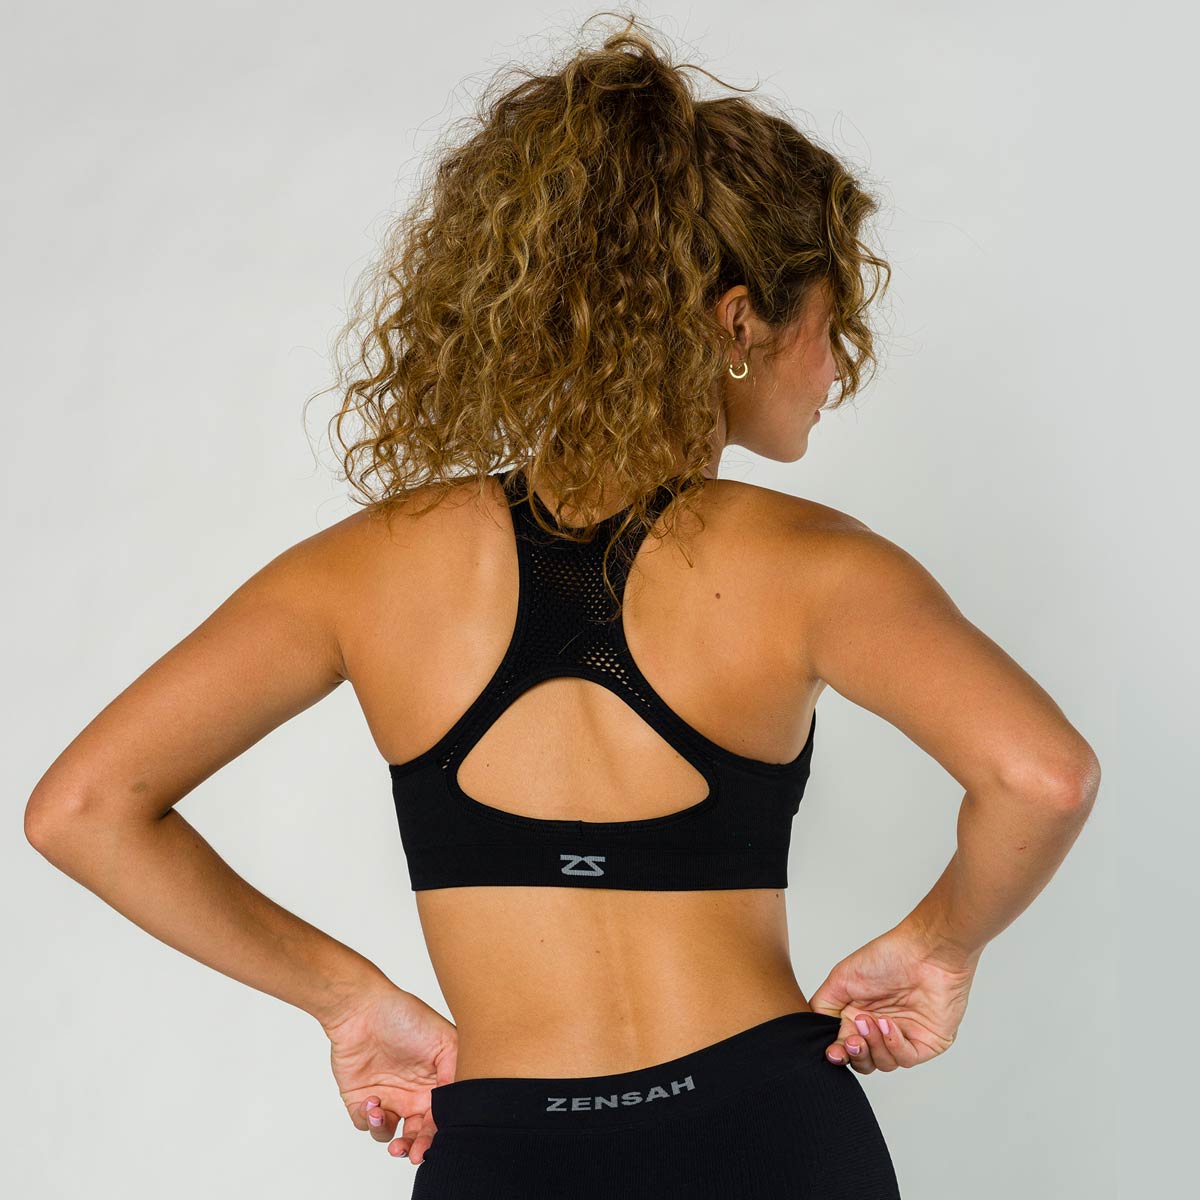 Navy Blue Cool Keyhole Sports Bra Manufacturer in USA